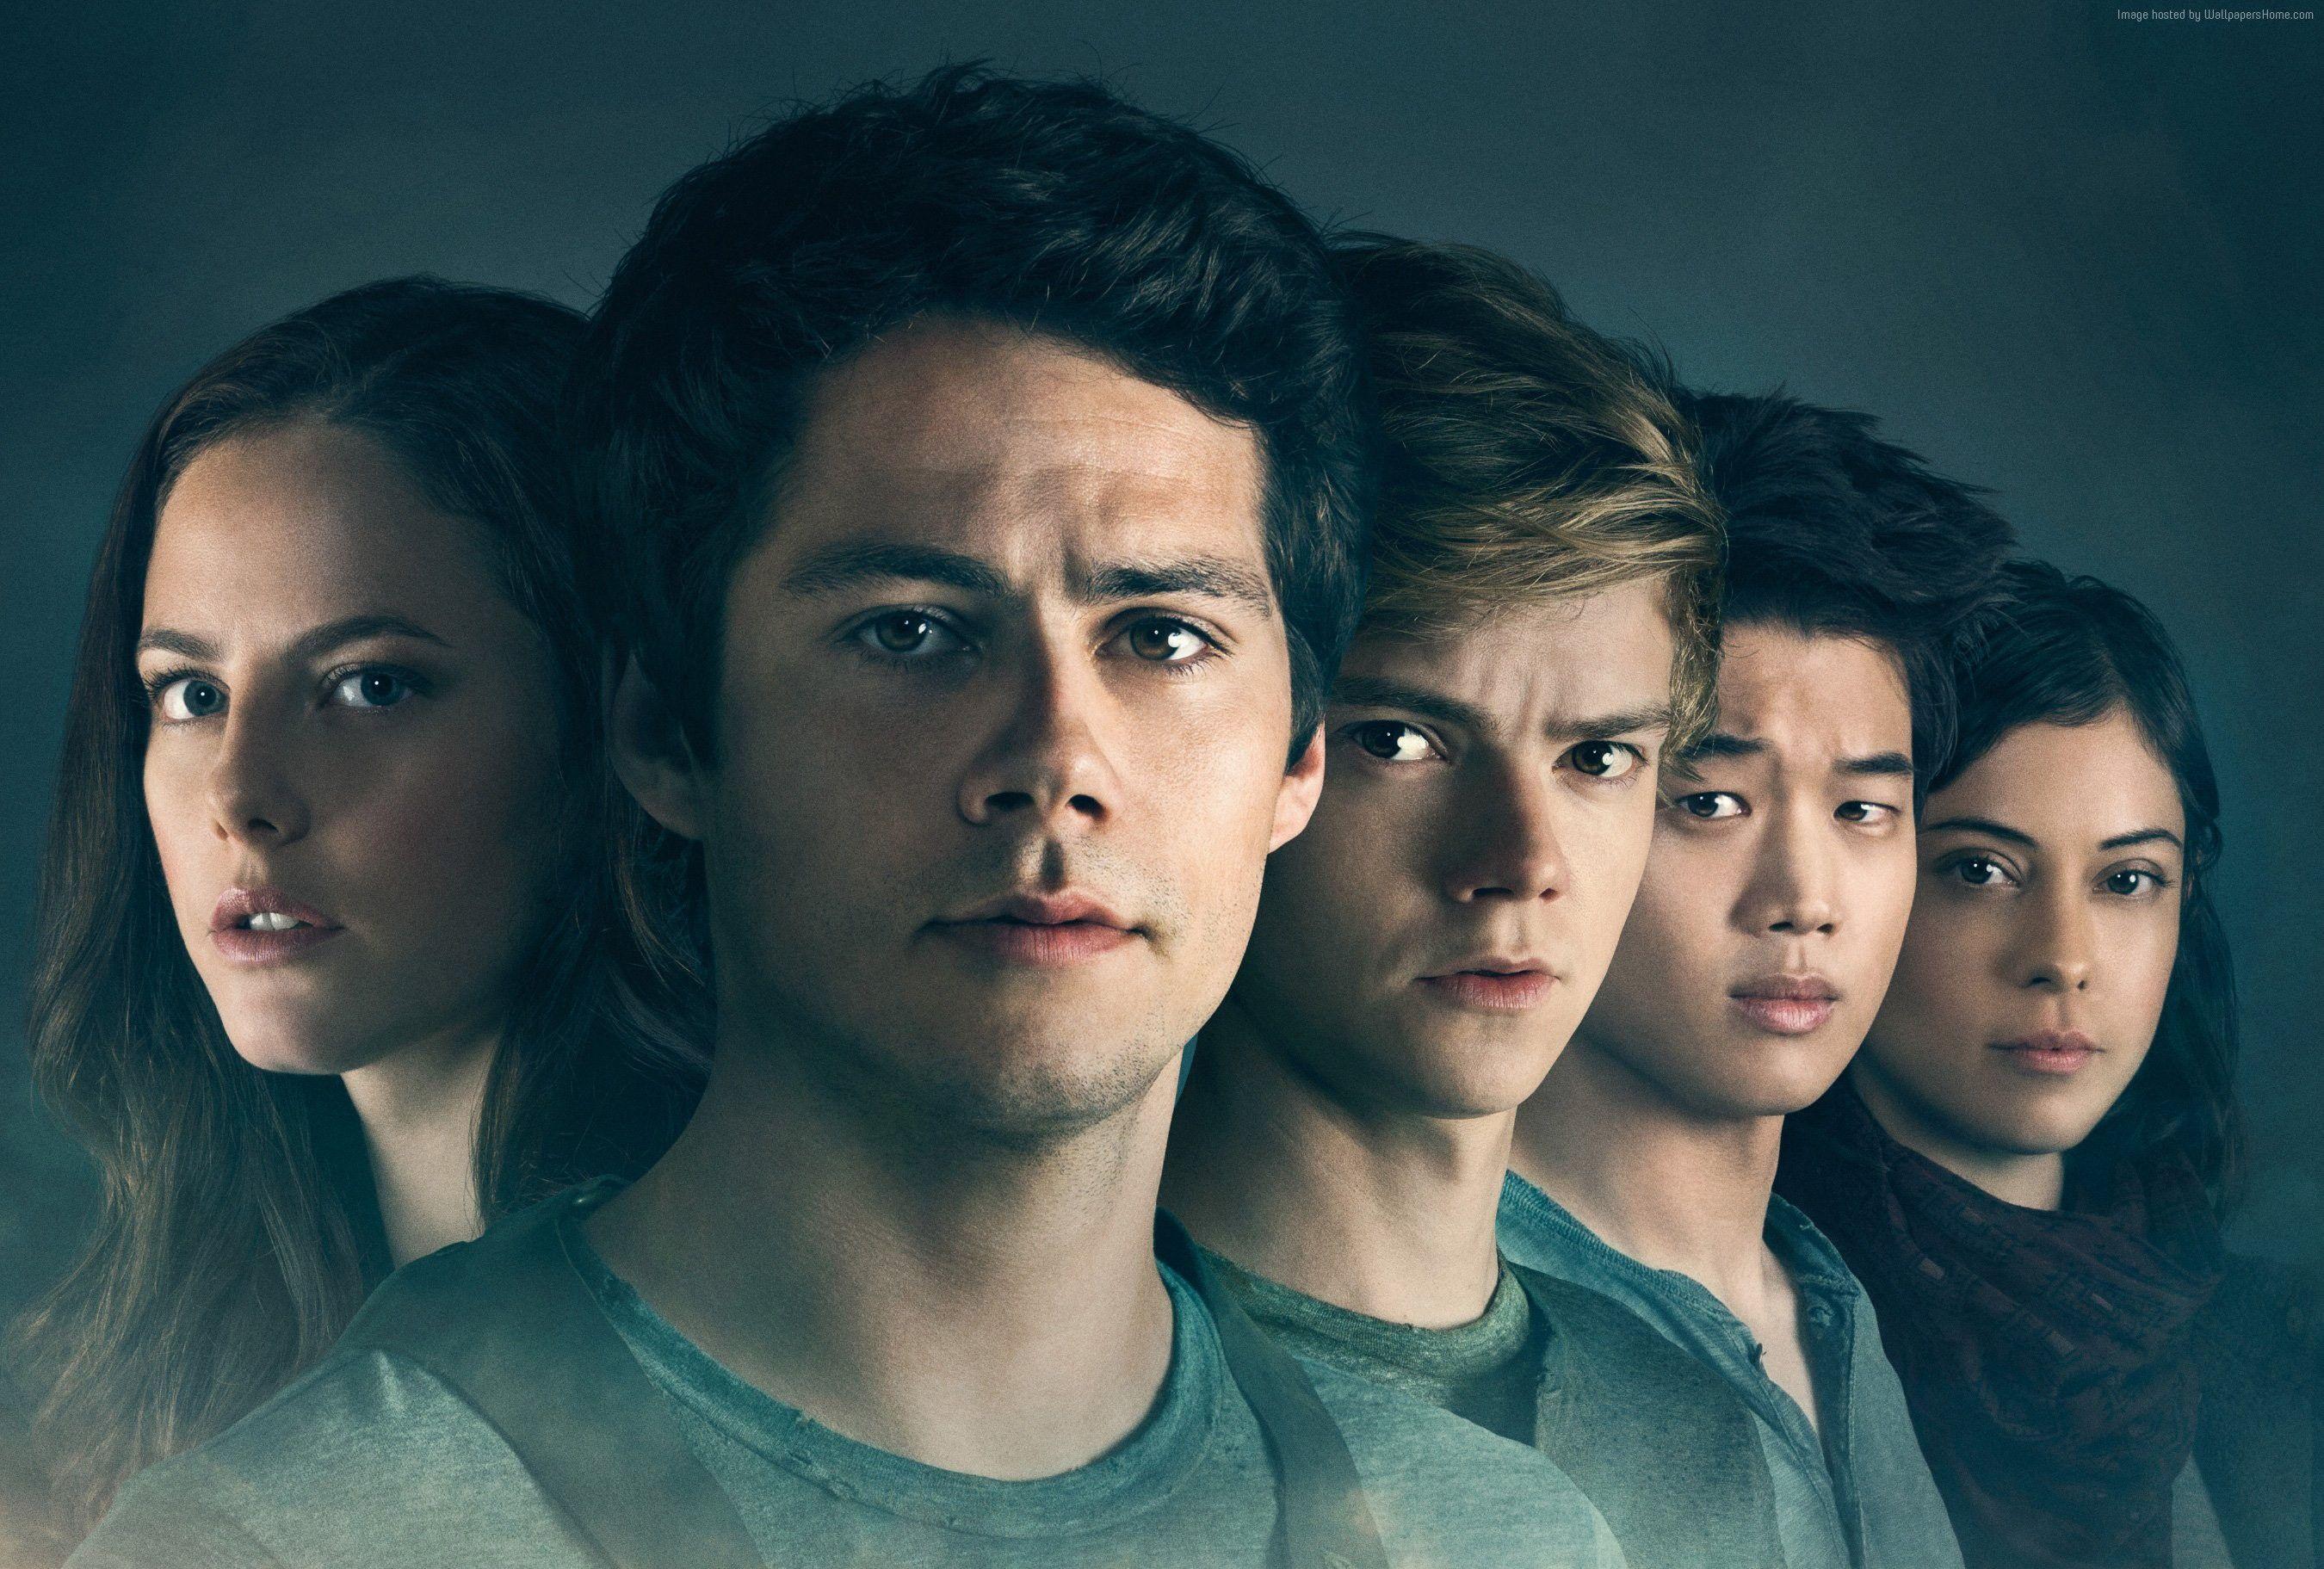 Wallpaper Maze Runner: The Death Cure, Dylan O'Brien, Thomas Brodie